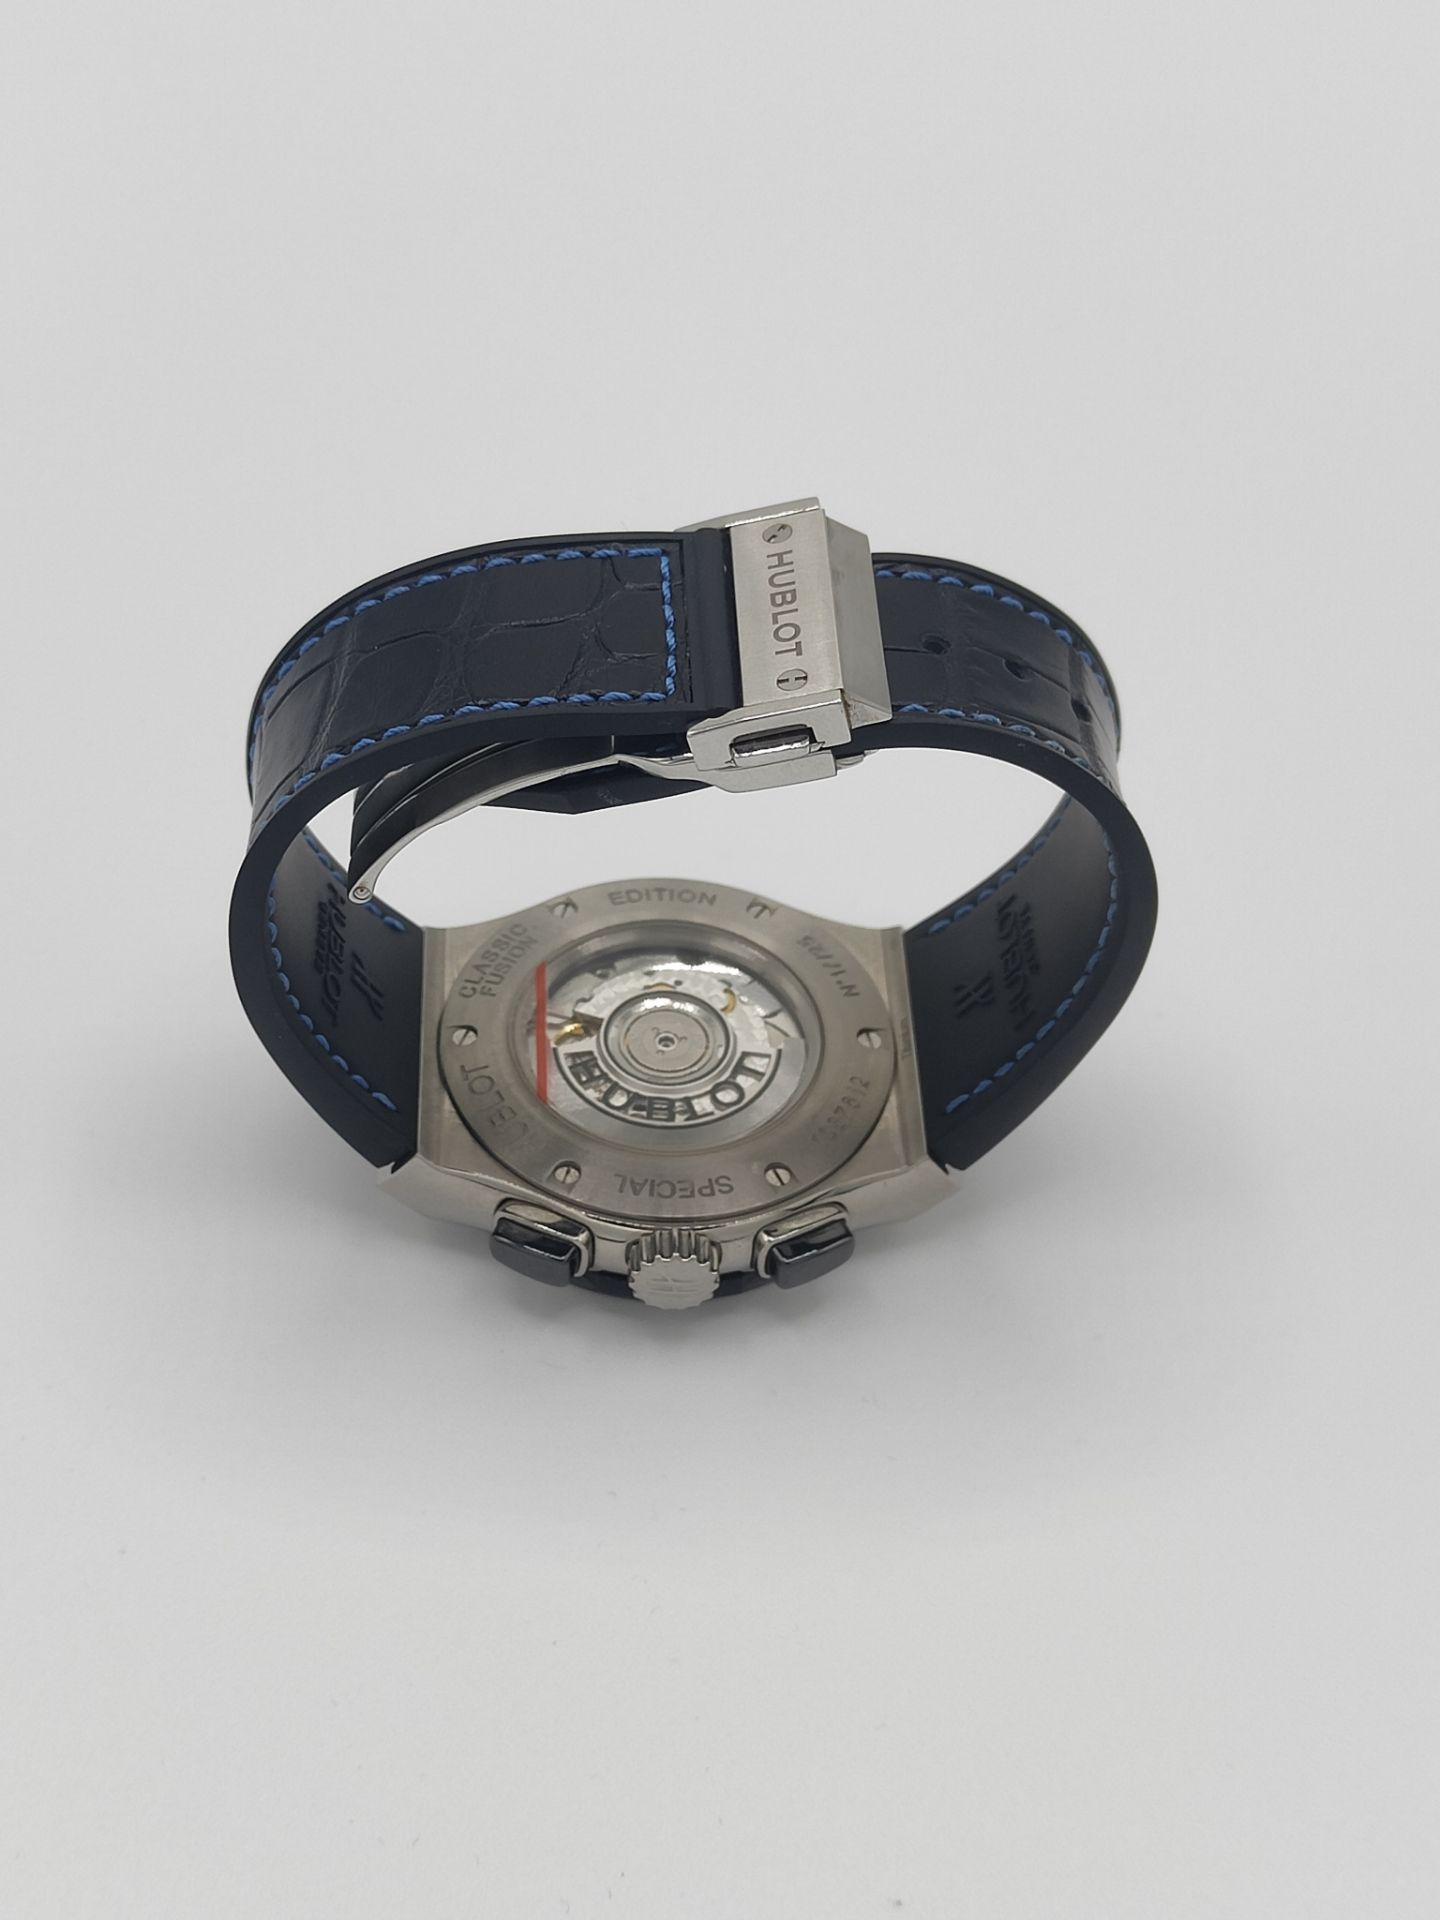 Hublot Classic Fusion Special Edition Watch - Image 8 of 11